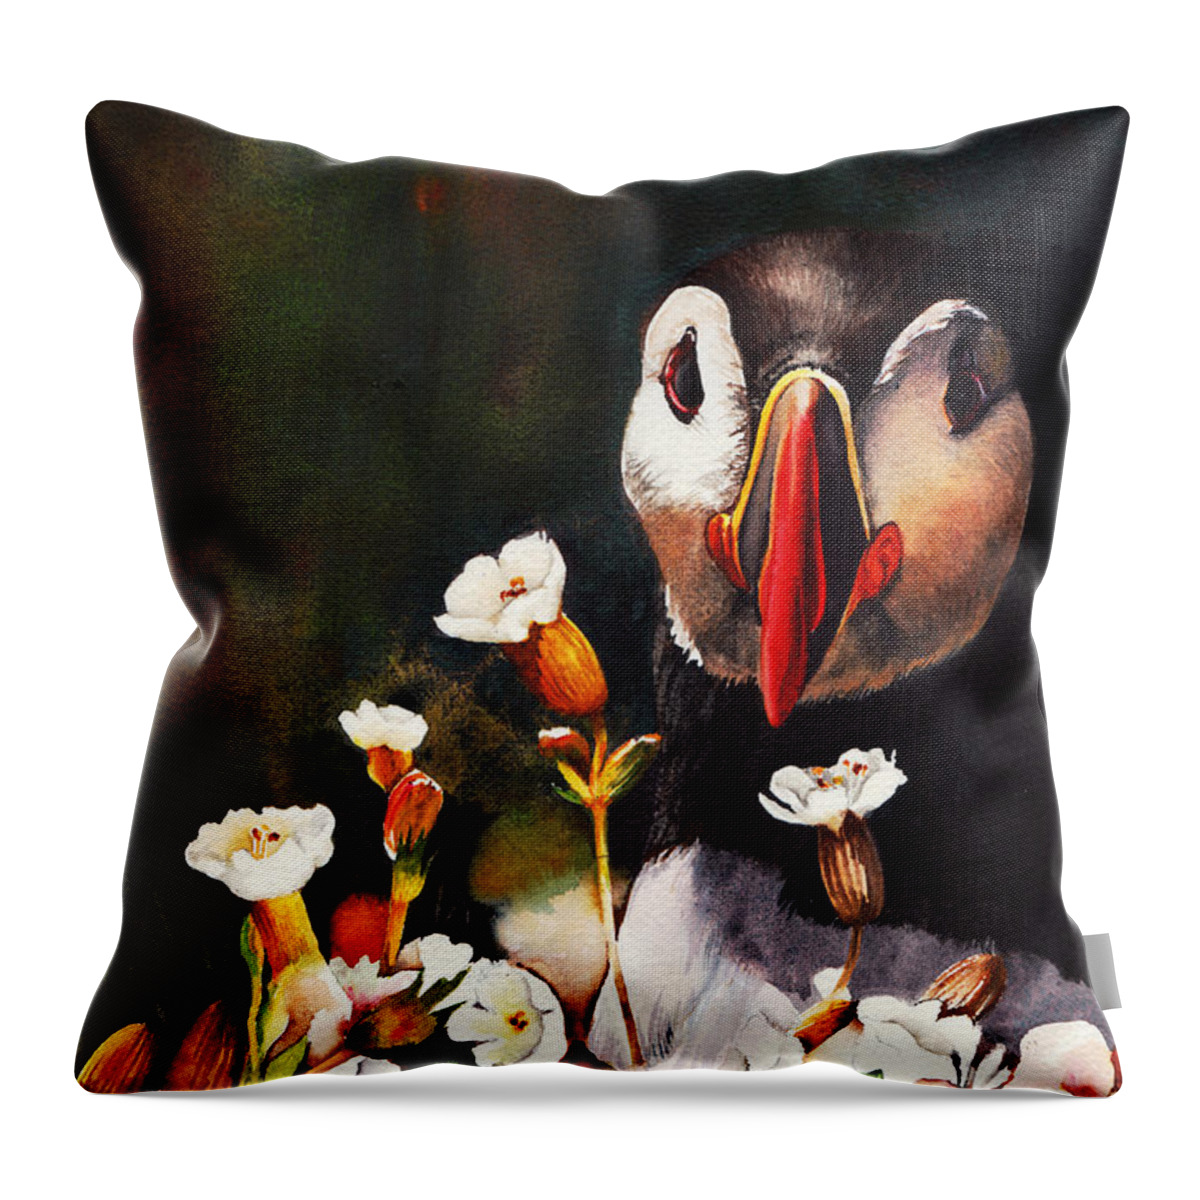 Puffin Throw Pillow featuring the painting In Your Face by Peter Williams